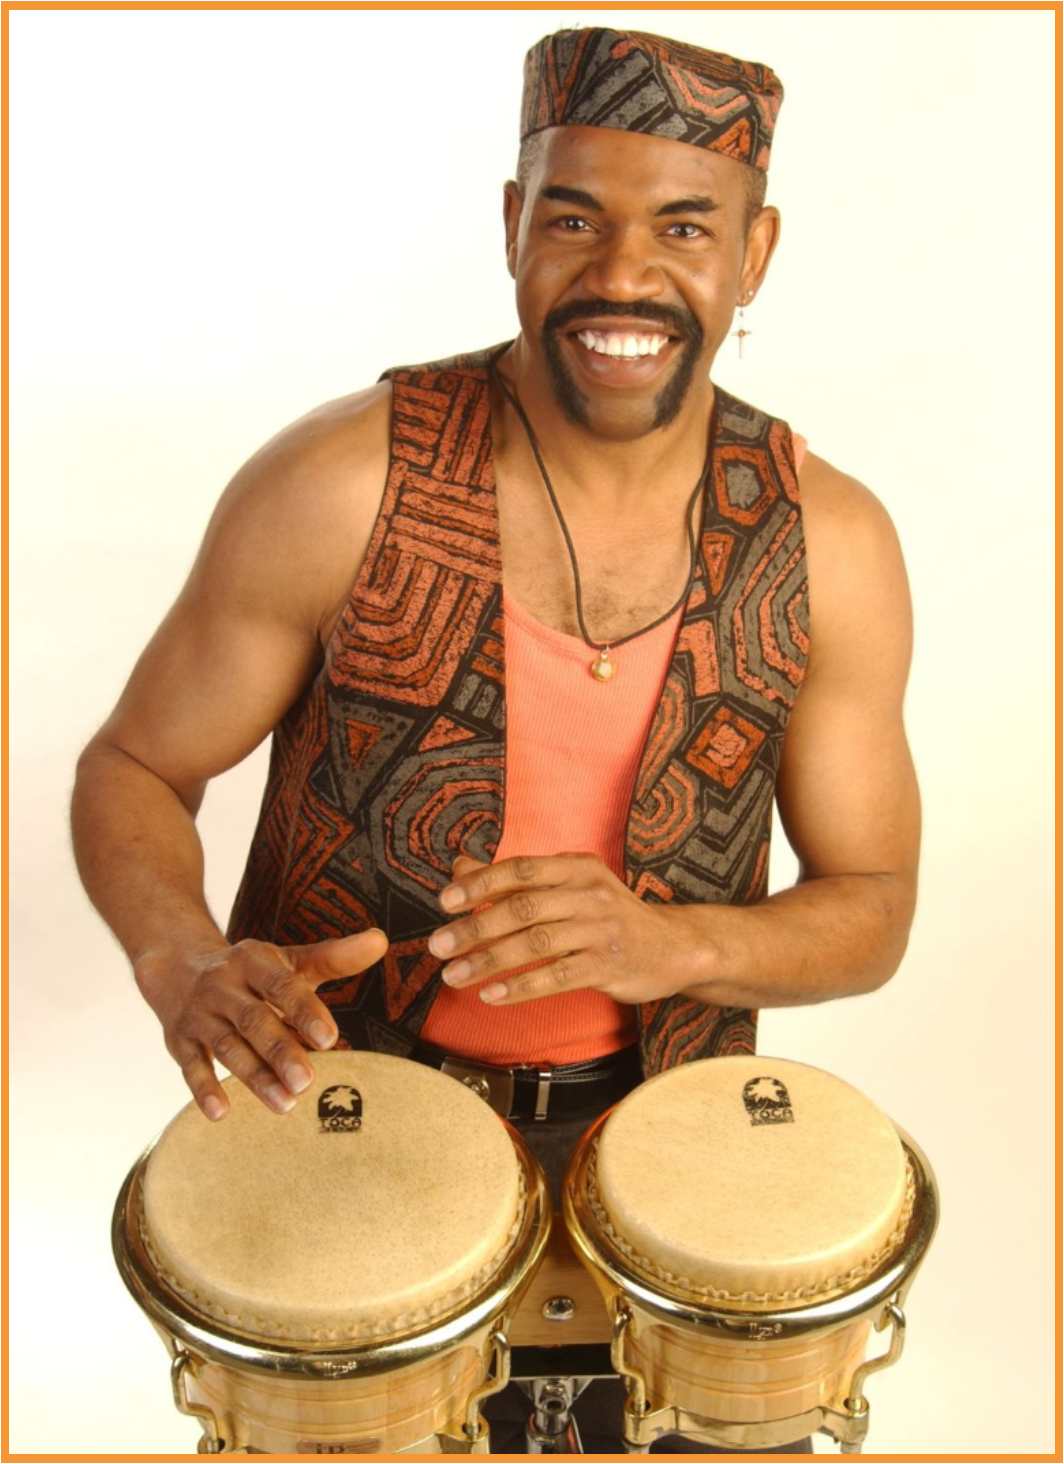 Smiling man with vest and hat playing drums